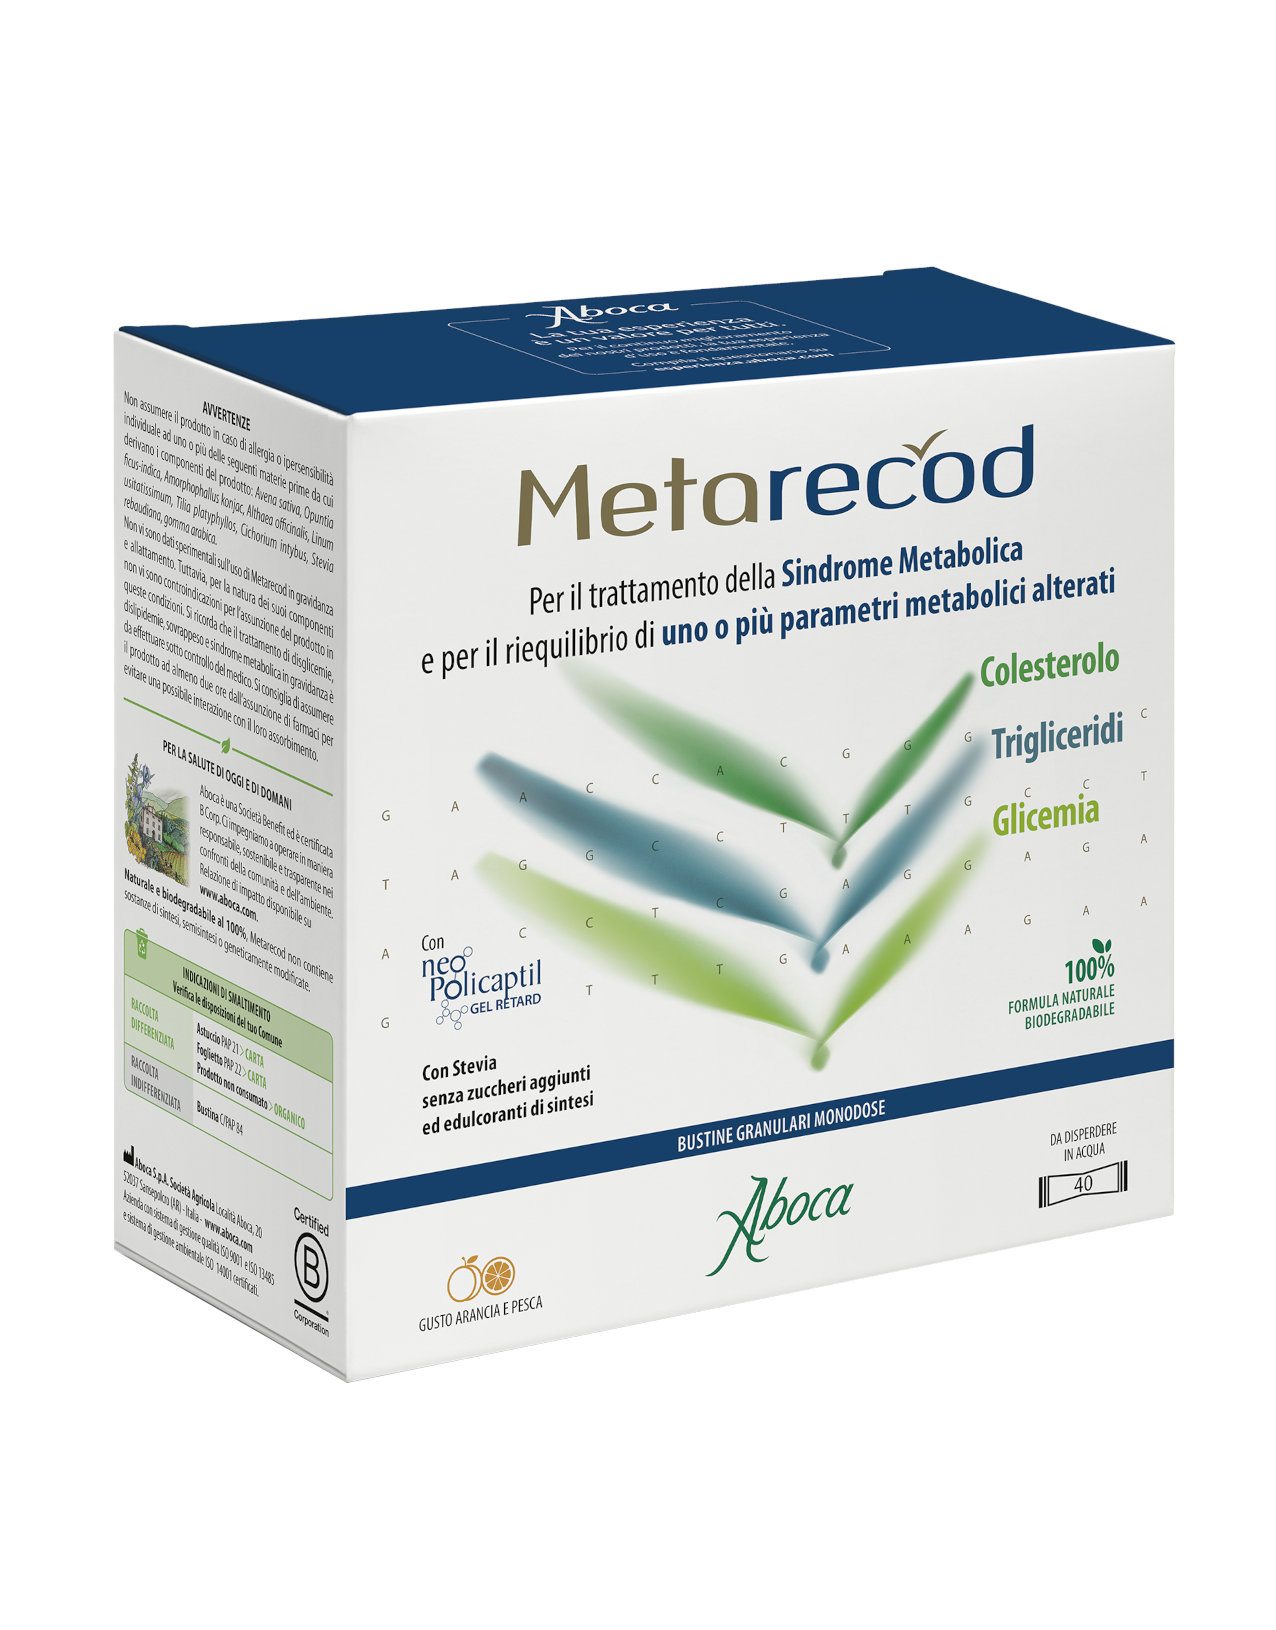 METARECOD 40 SACHETS-DOSE OF PELLETS